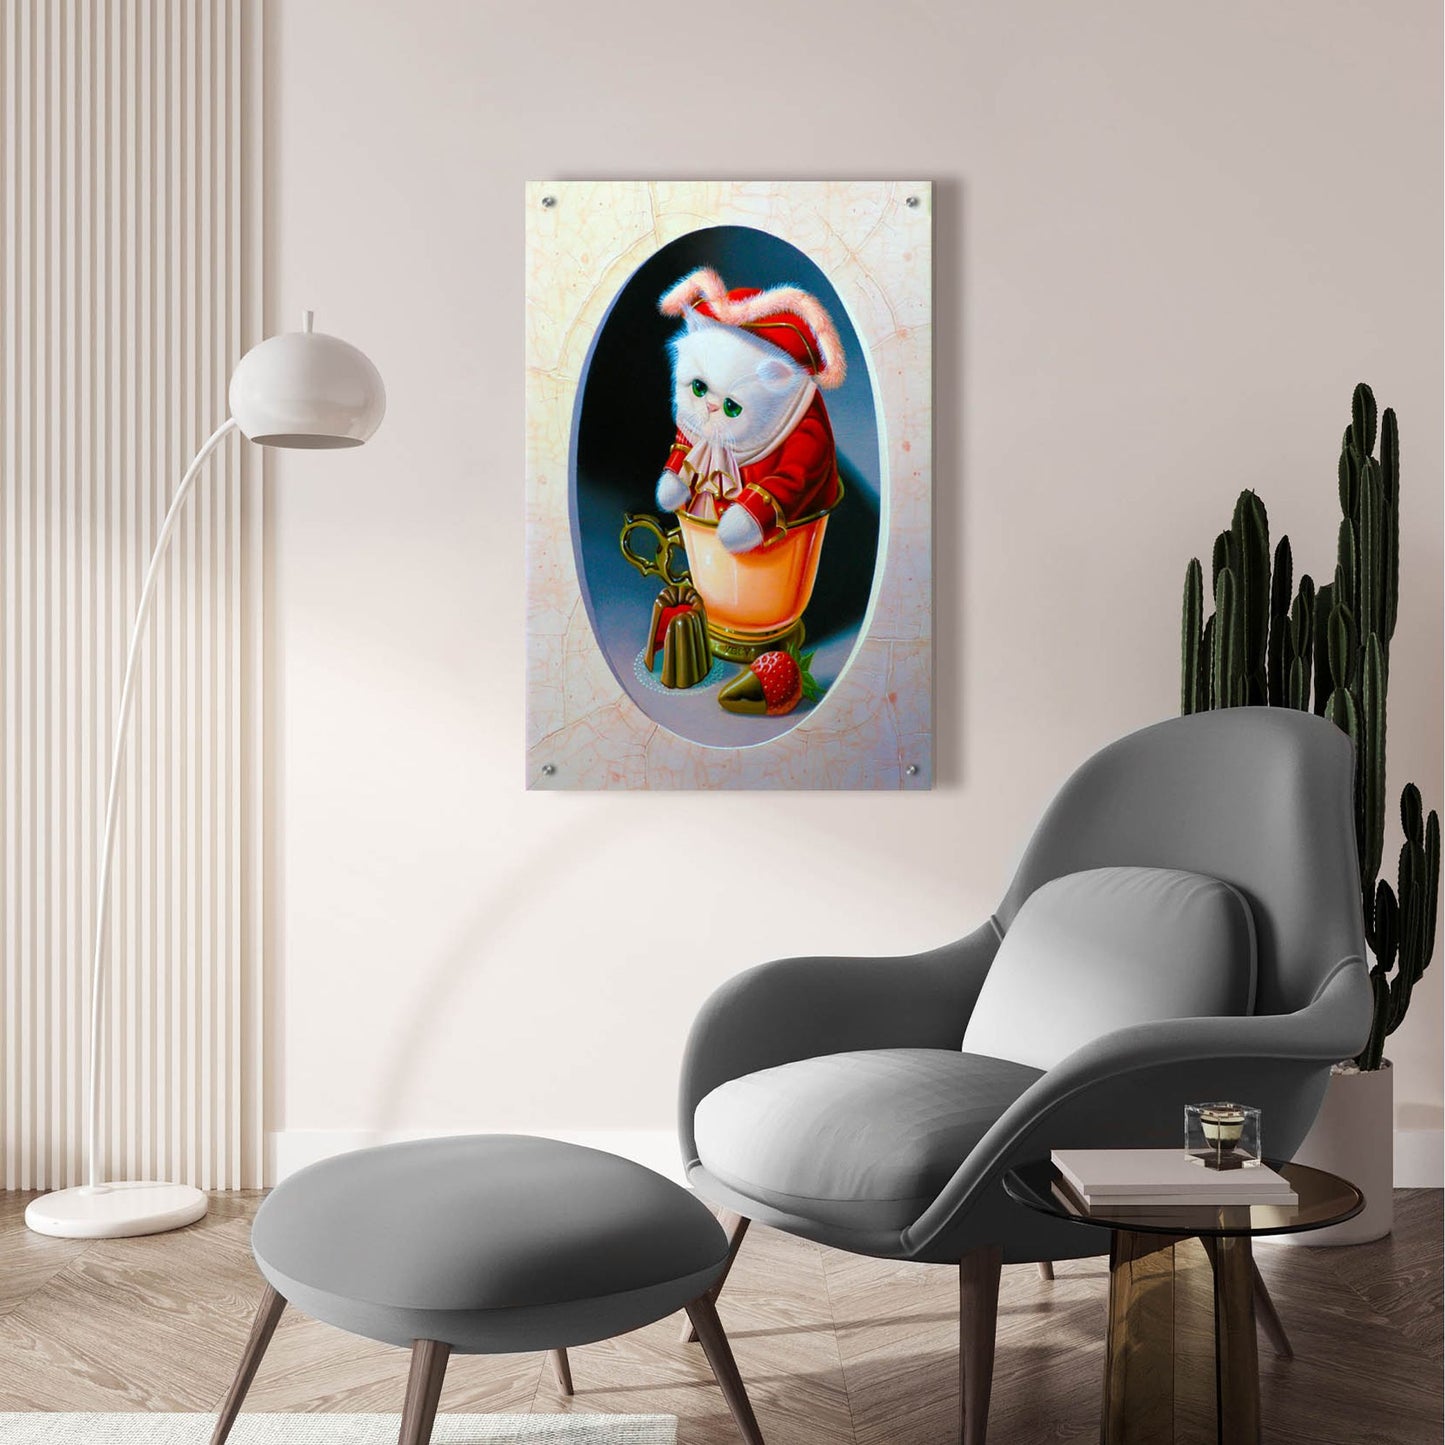 Epic Art 'The Corsair With Sweets' by Valery Vecu Quitard, Acrylic Glass Wall Art,24x36